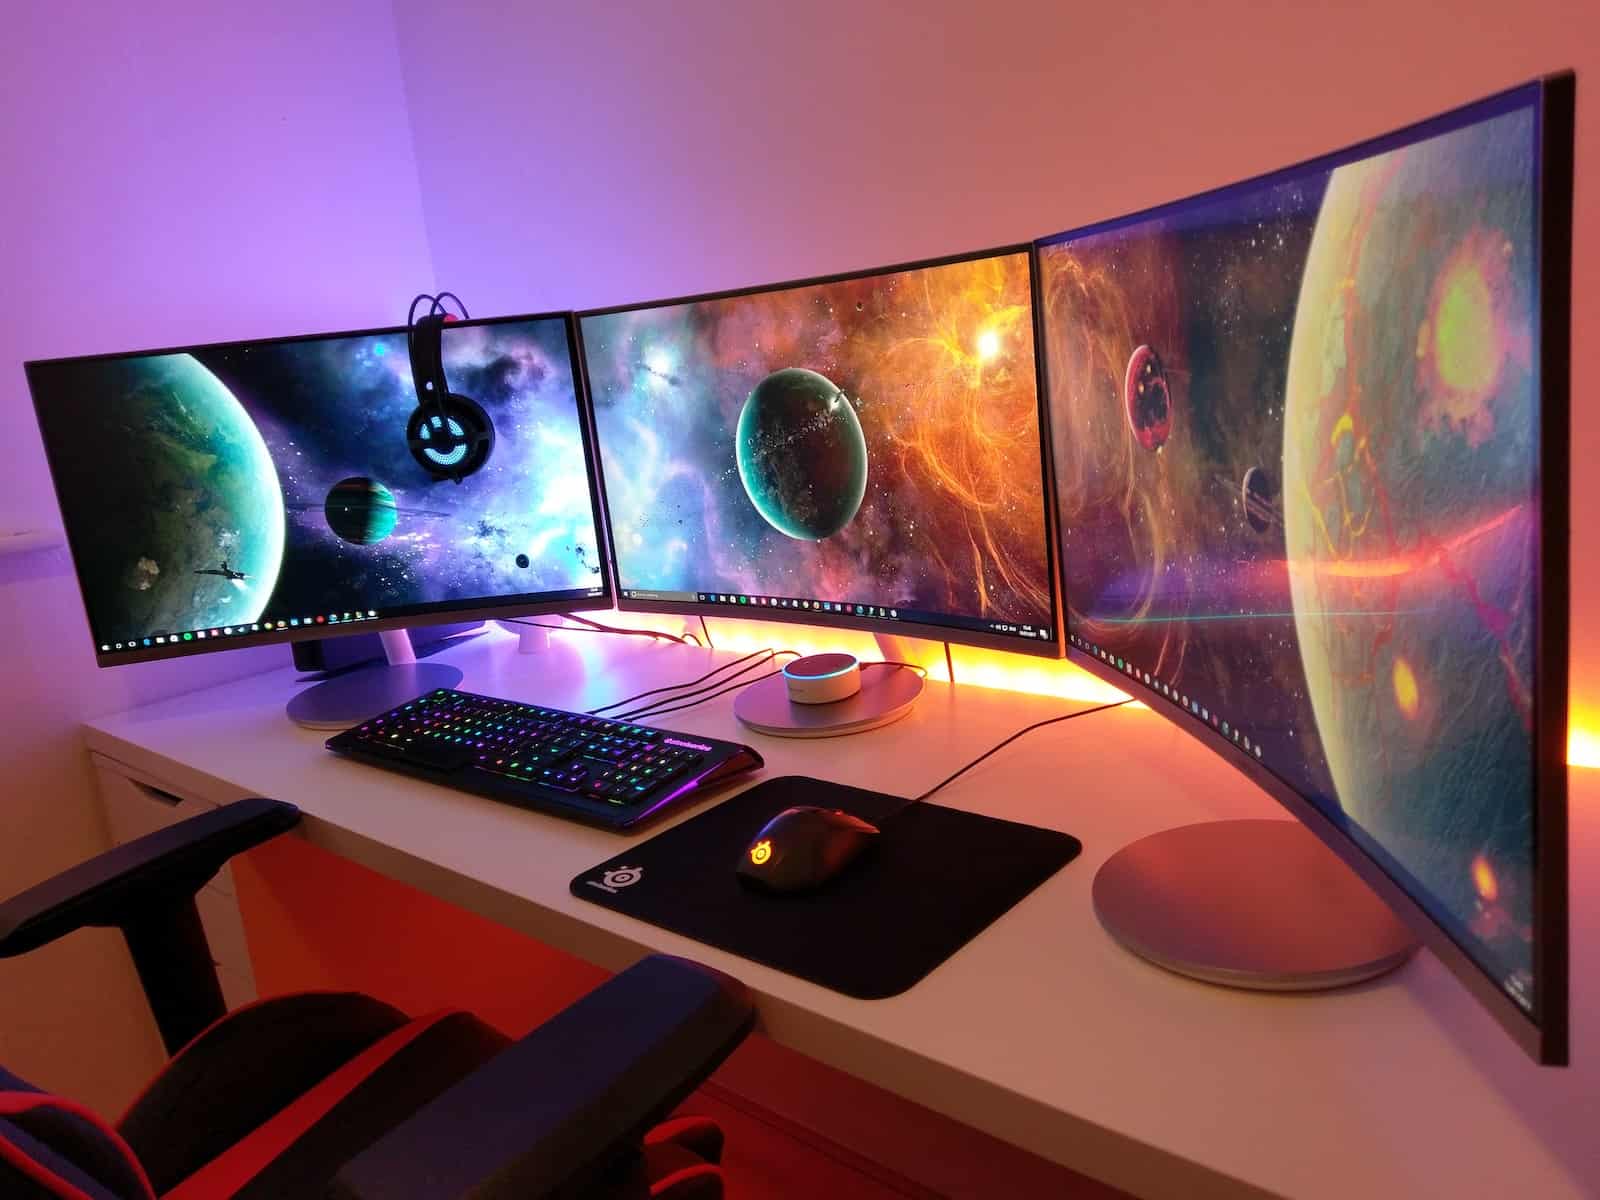 Are 240Hz Monitors Good for Gaming and Worth the Upgrade?